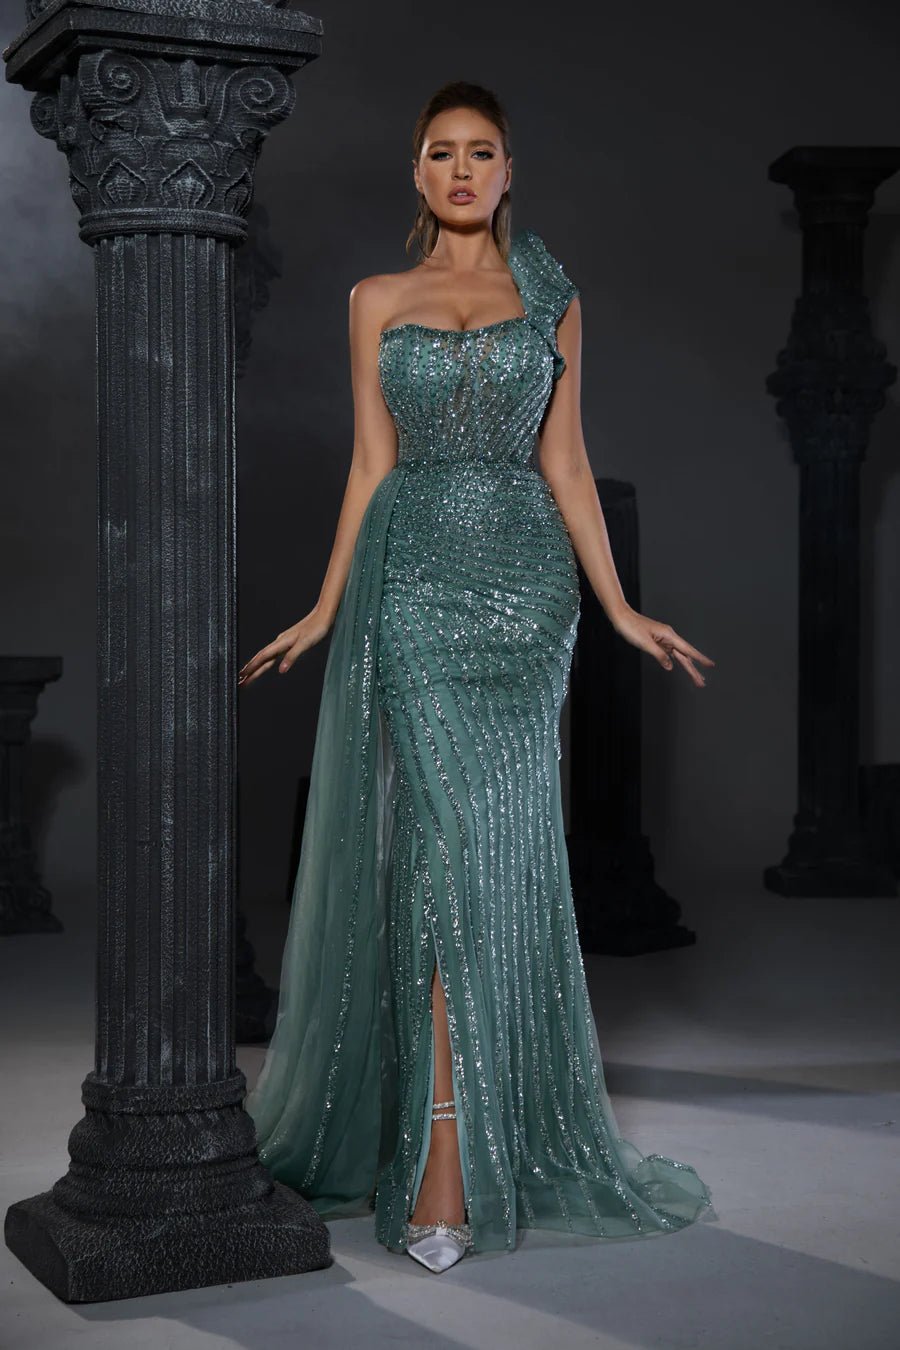 Luxurious Turq Sequin Evening Gown with One Shoulder and Slit - Pretty Sequin Dress andDesigner Sequin Gown Plus Size - WonderlandByLilian